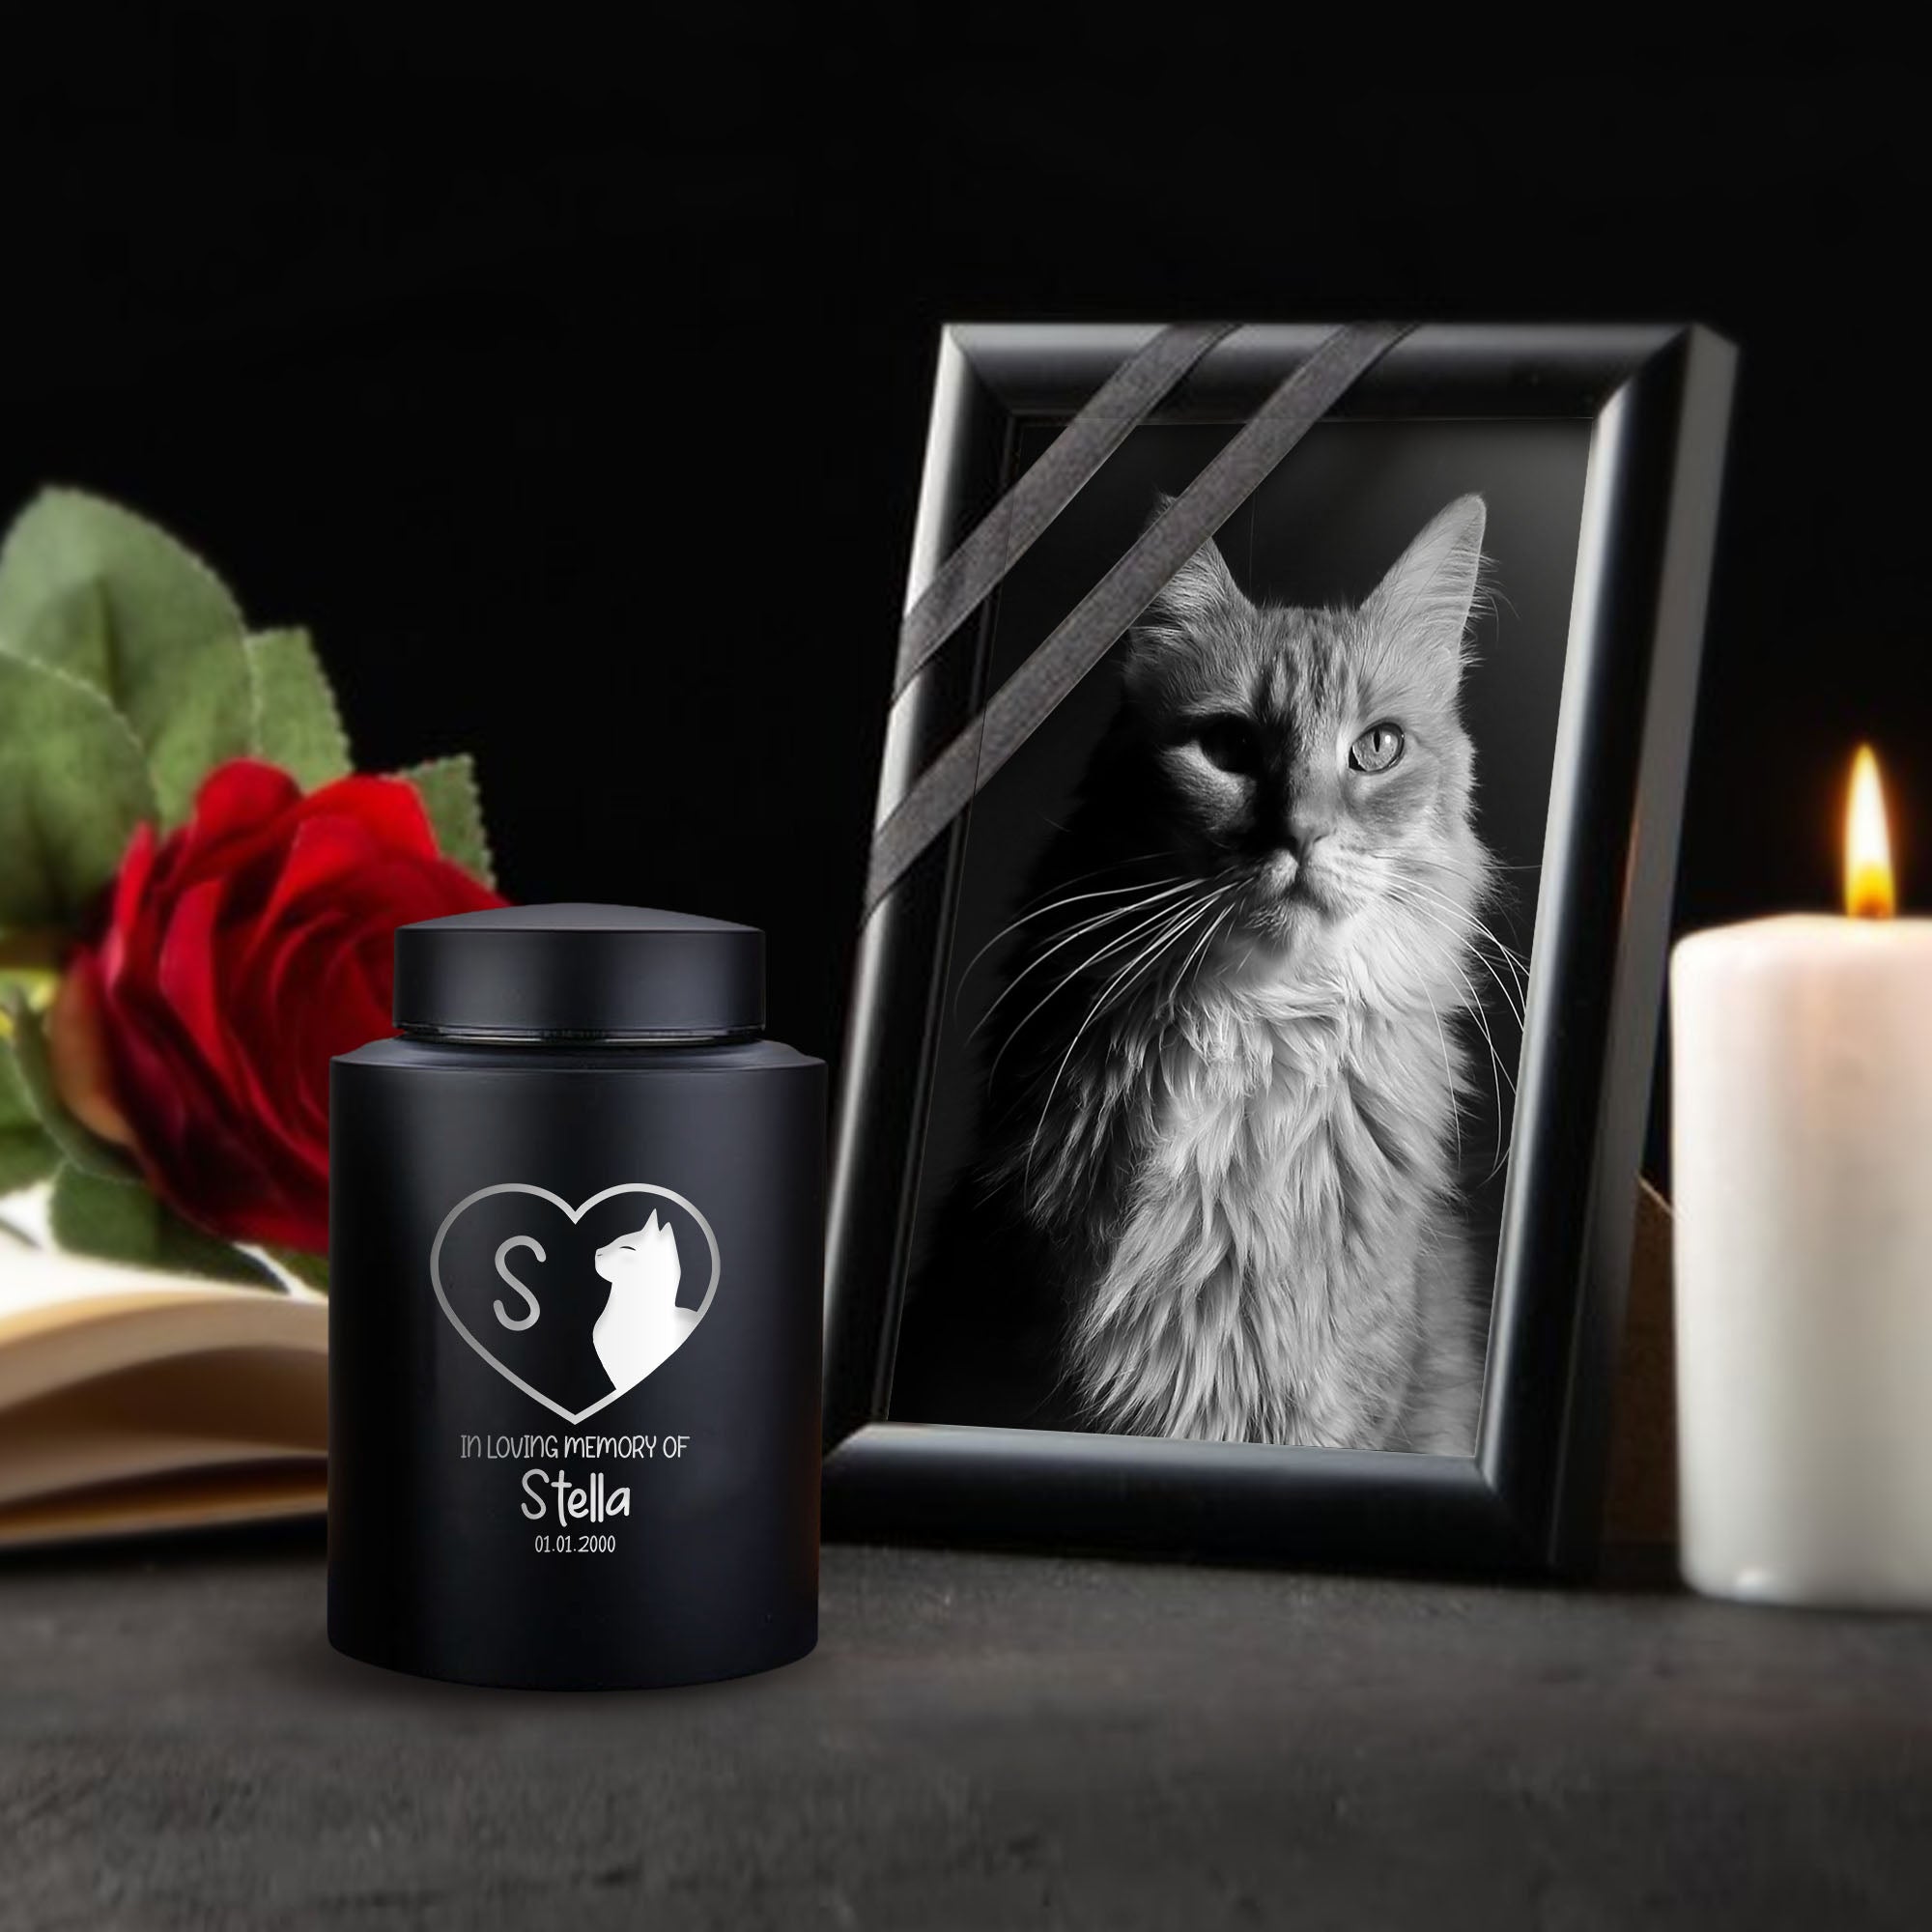 Personalized Custom Large Urn Pet Cat Cremation Urn Engraved with Name, Date and Text - Round Powder Coated Steel Urns for Cat Ashes, Pet Size 90-115 lbs